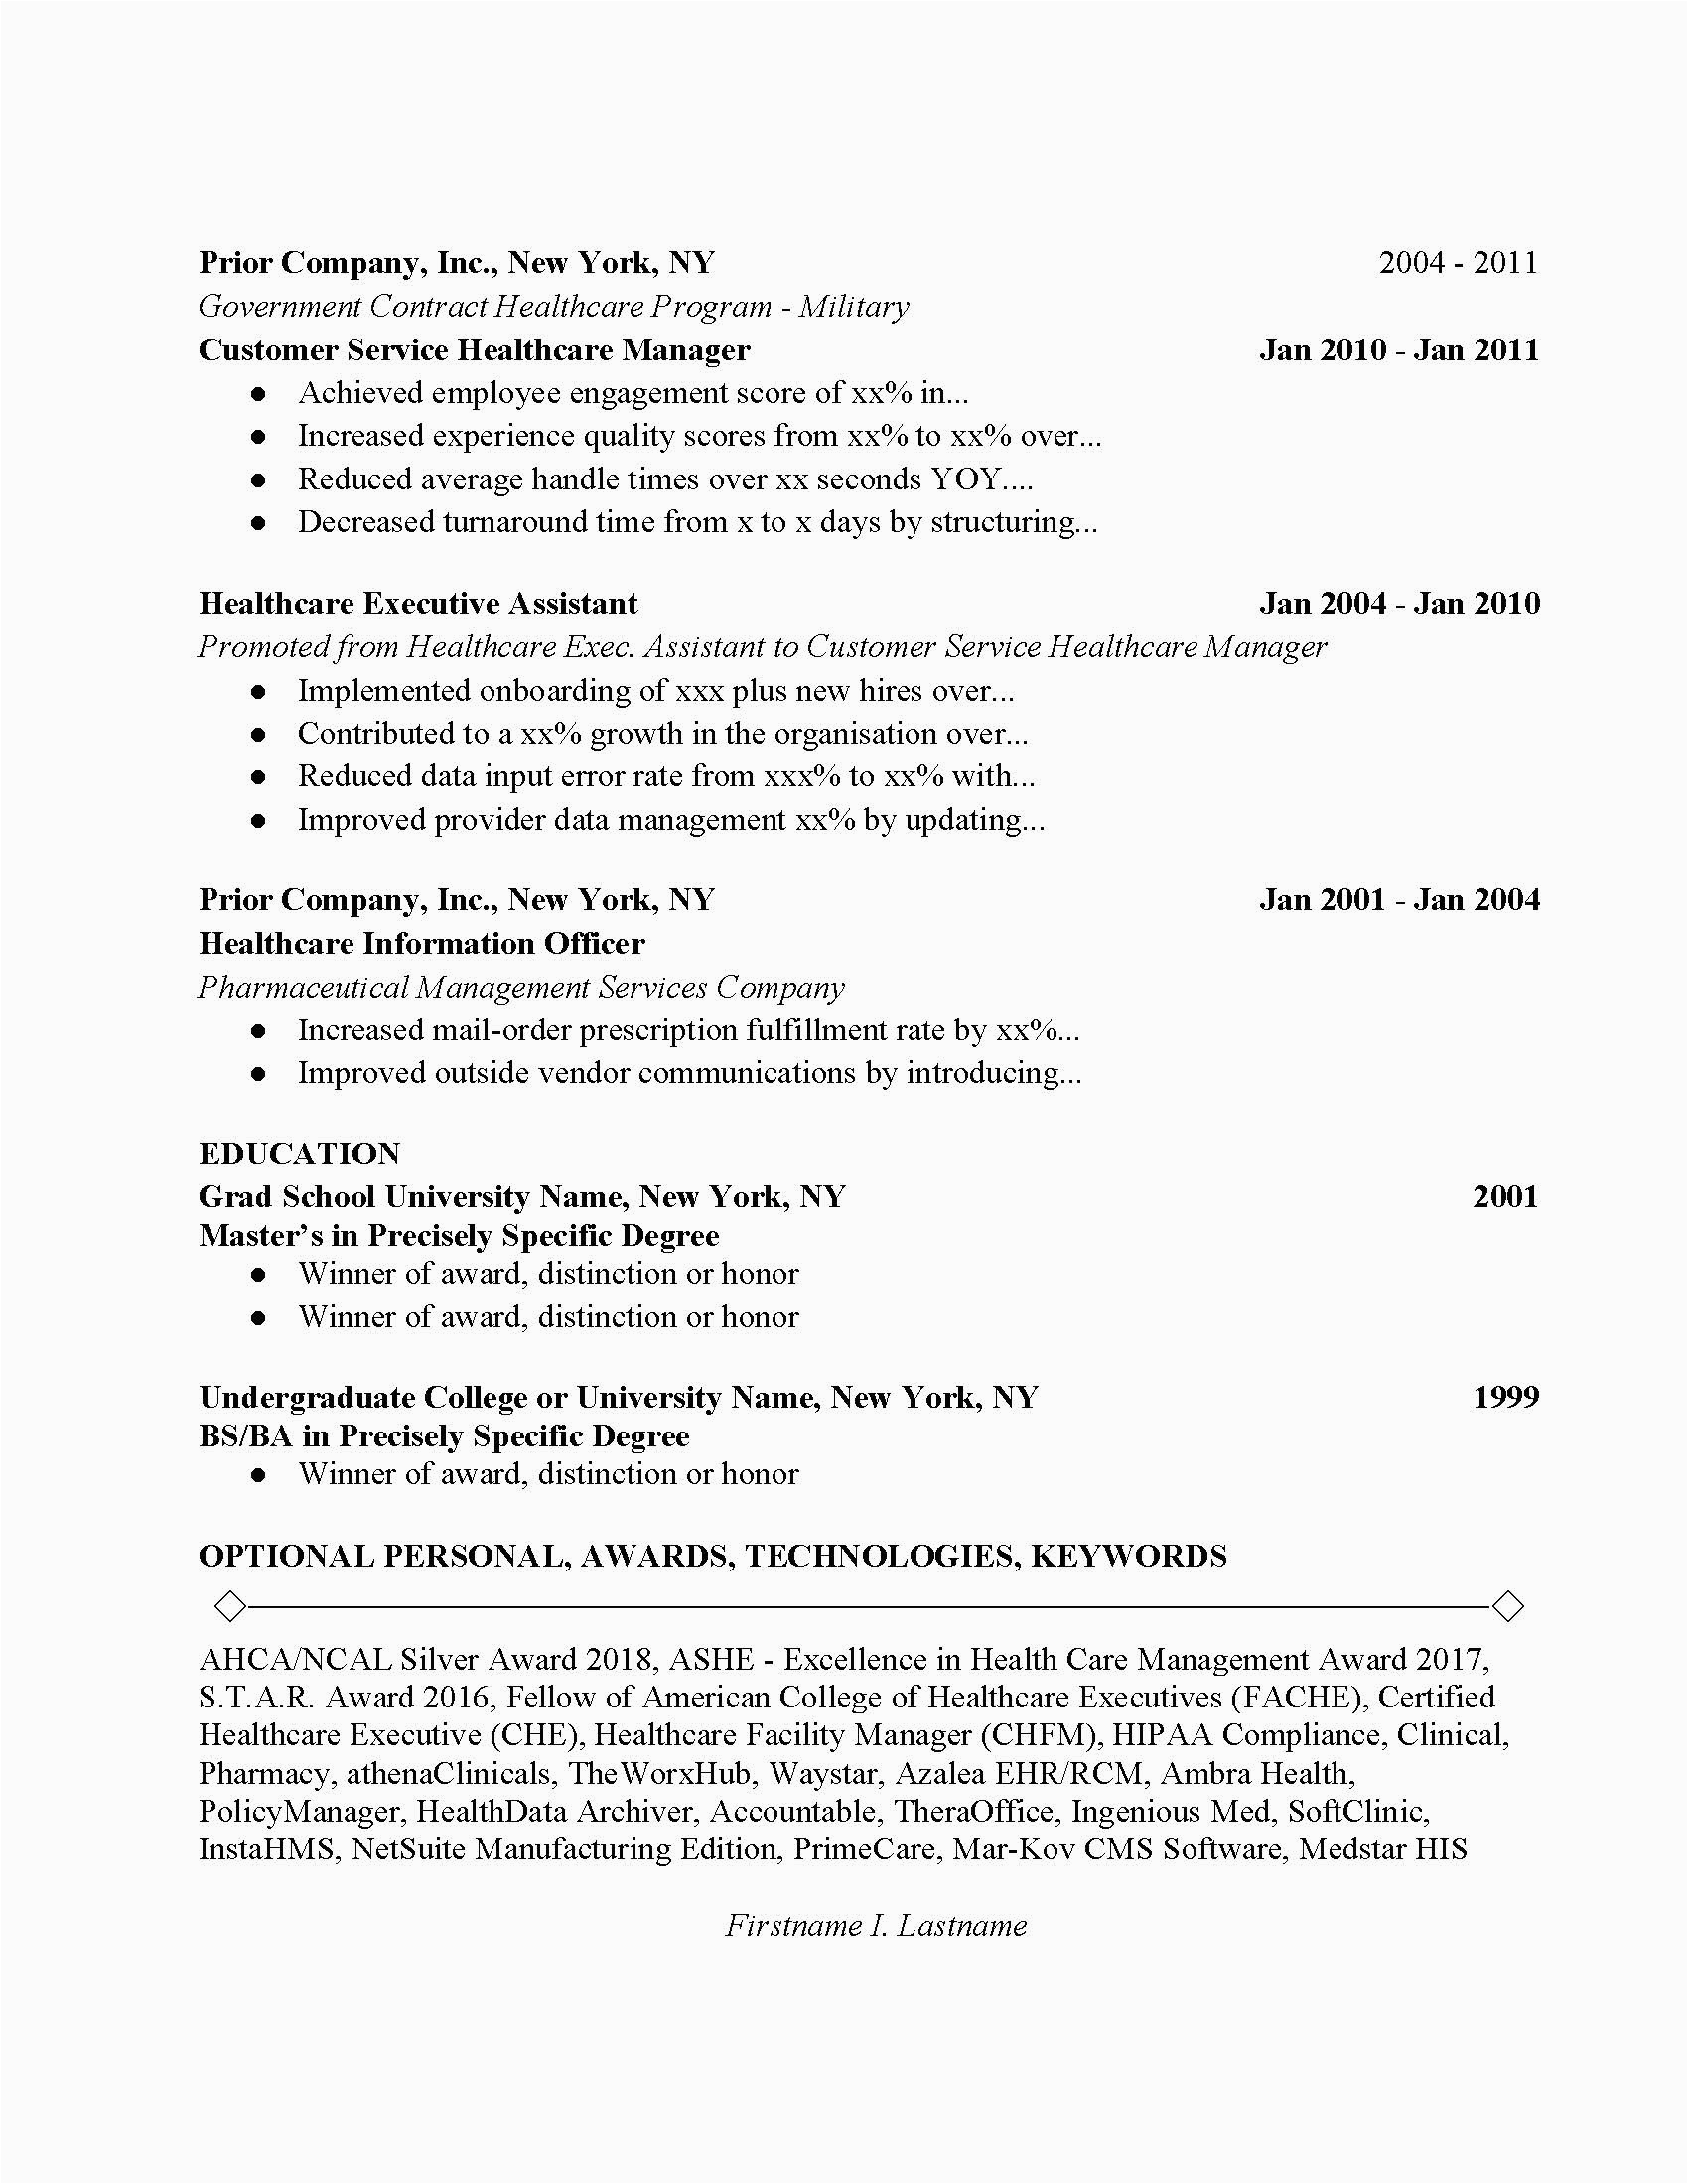 Sample Resume for Professionals In Healthcare Healthcare General Manager Resume Example